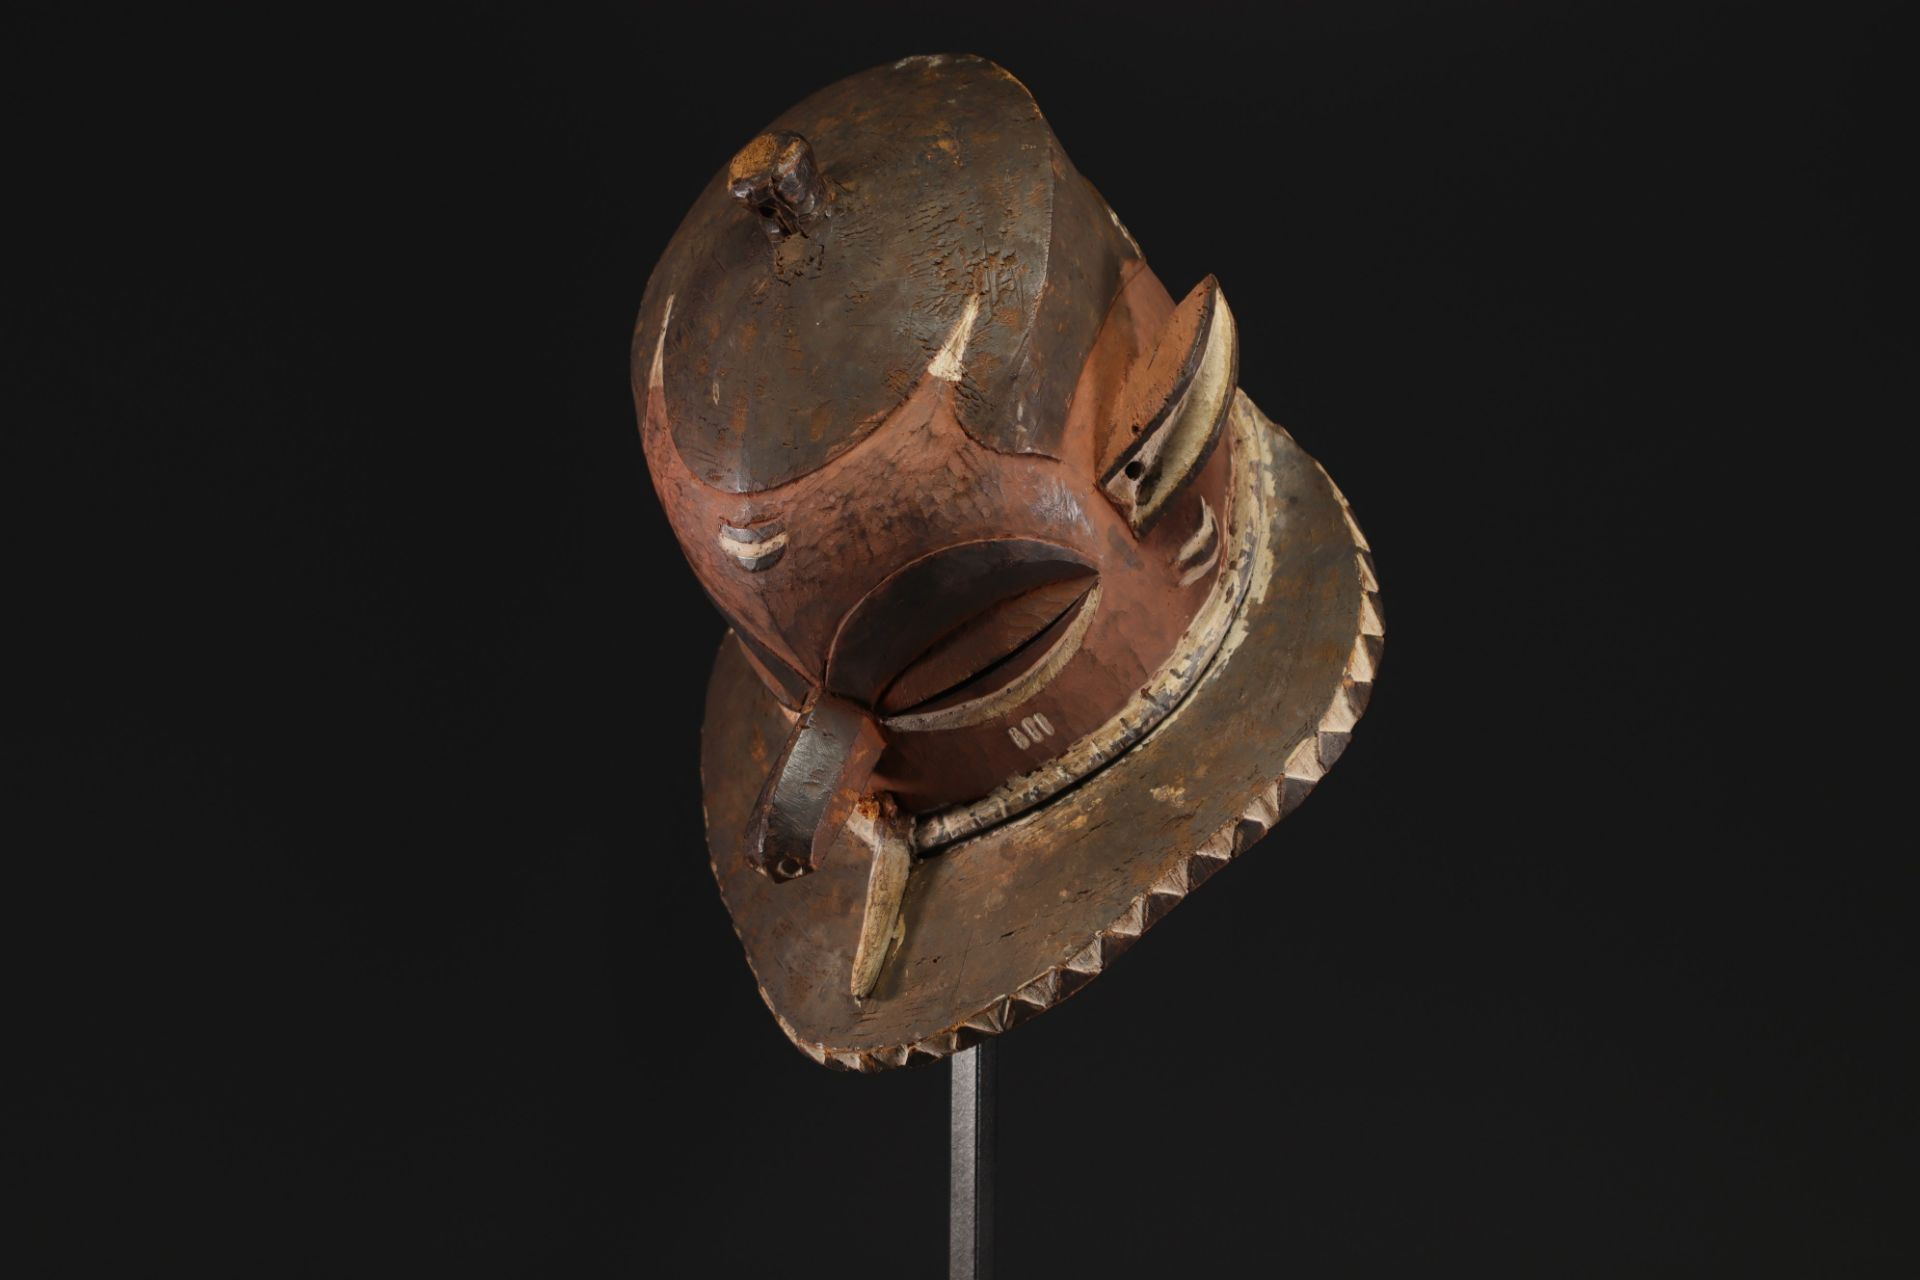 Eastern Pende mask - Dem.Rep.Congo - Image 4 of 7